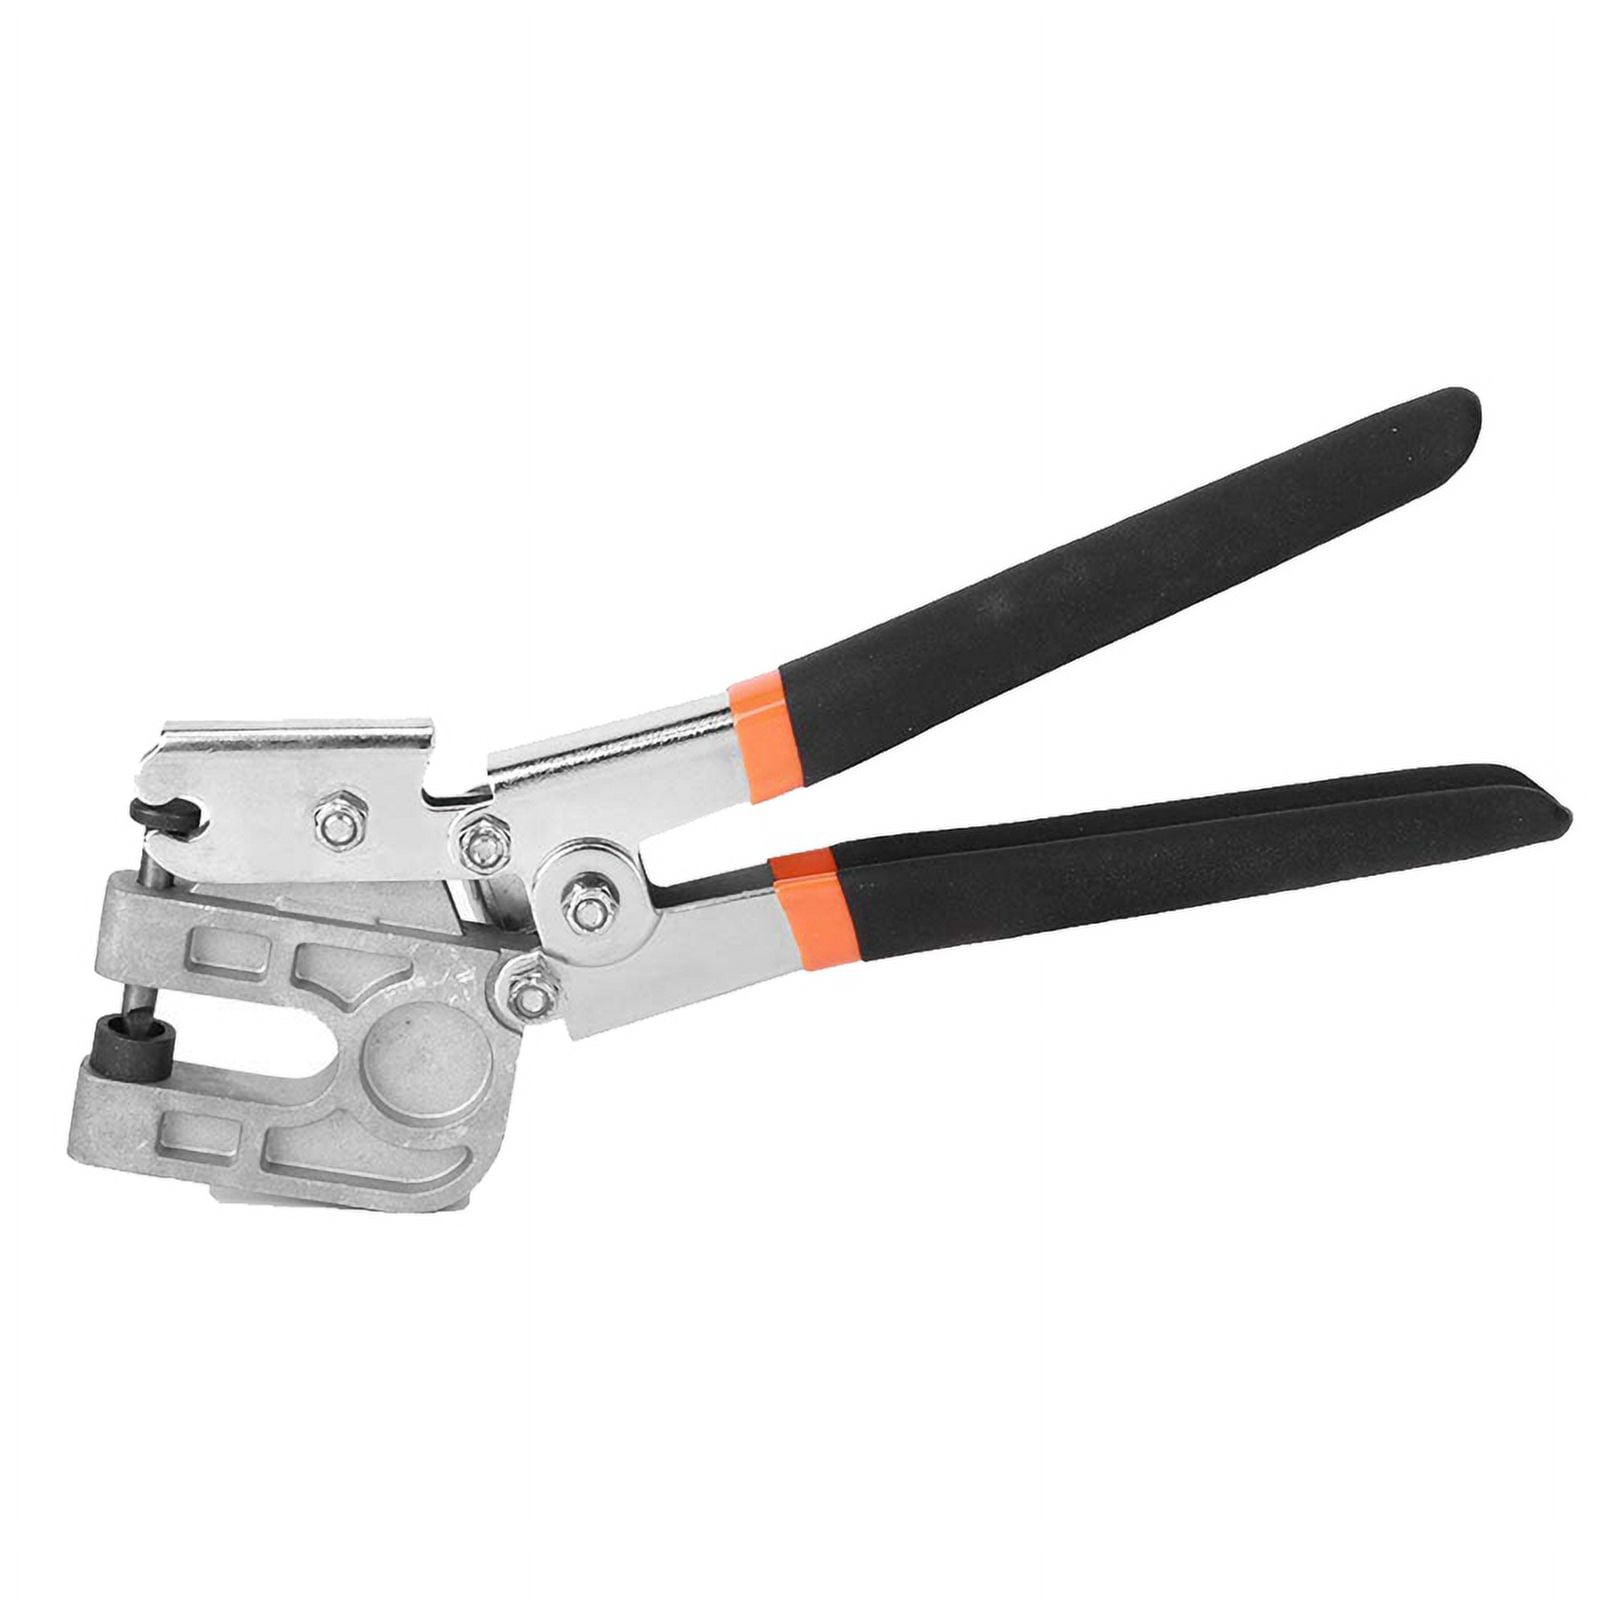 Metal Stud Framing Tool 99.9% Of You DON'T Know! Tezyzy? 